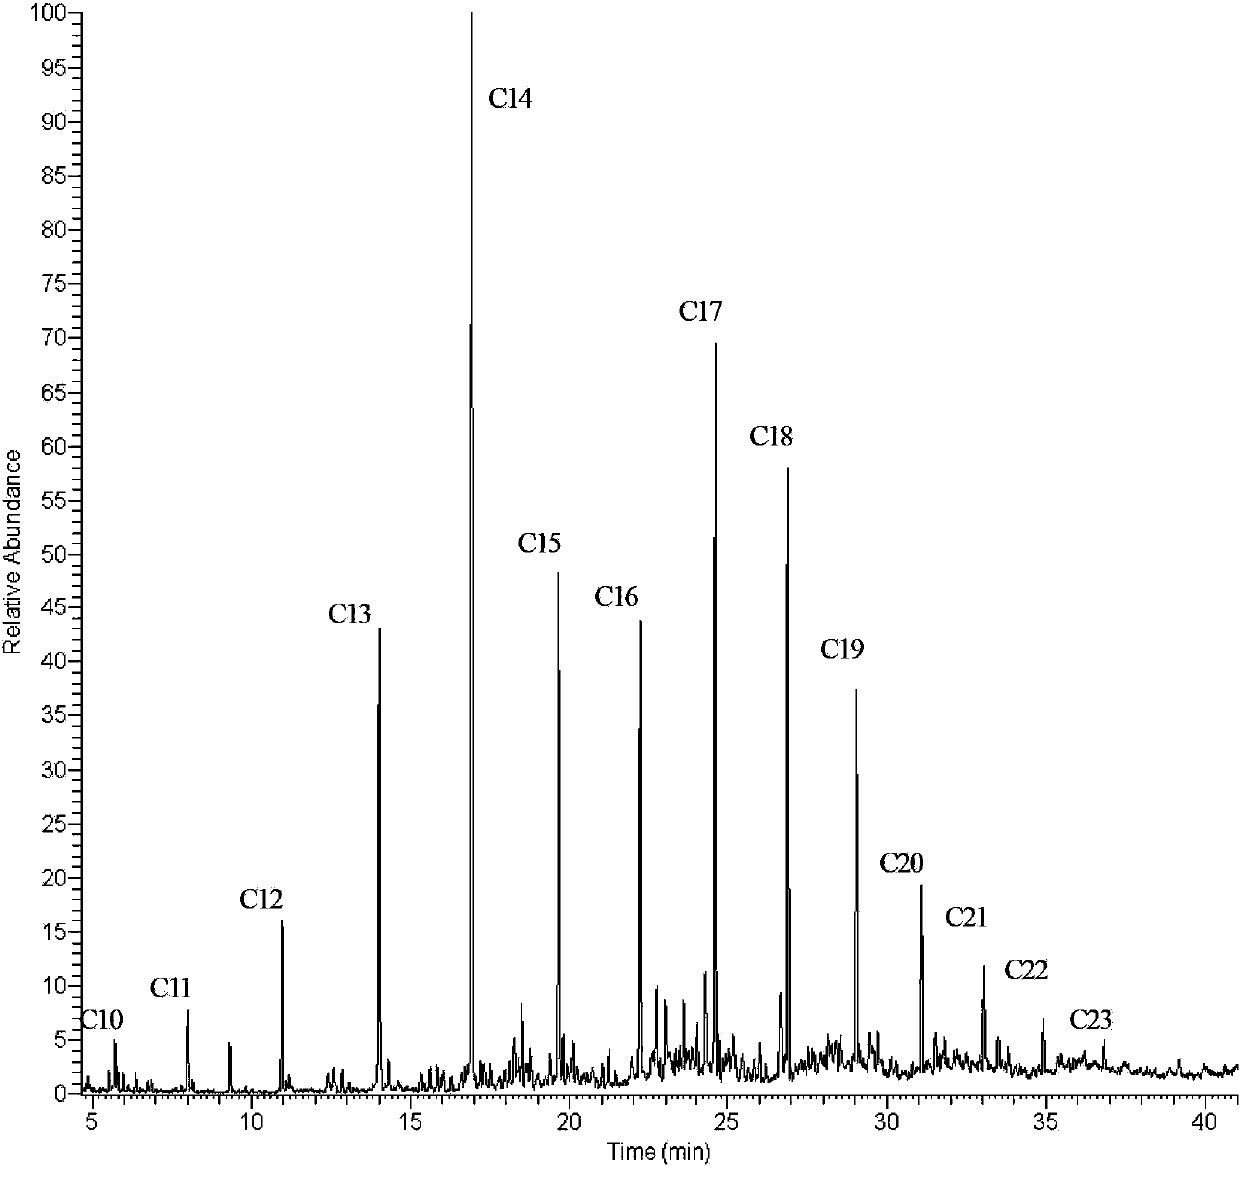 Dechlorination deuterium-added gas chromatography-mass spectrometry method for short-chain and medium-chain chlorinated paraffin